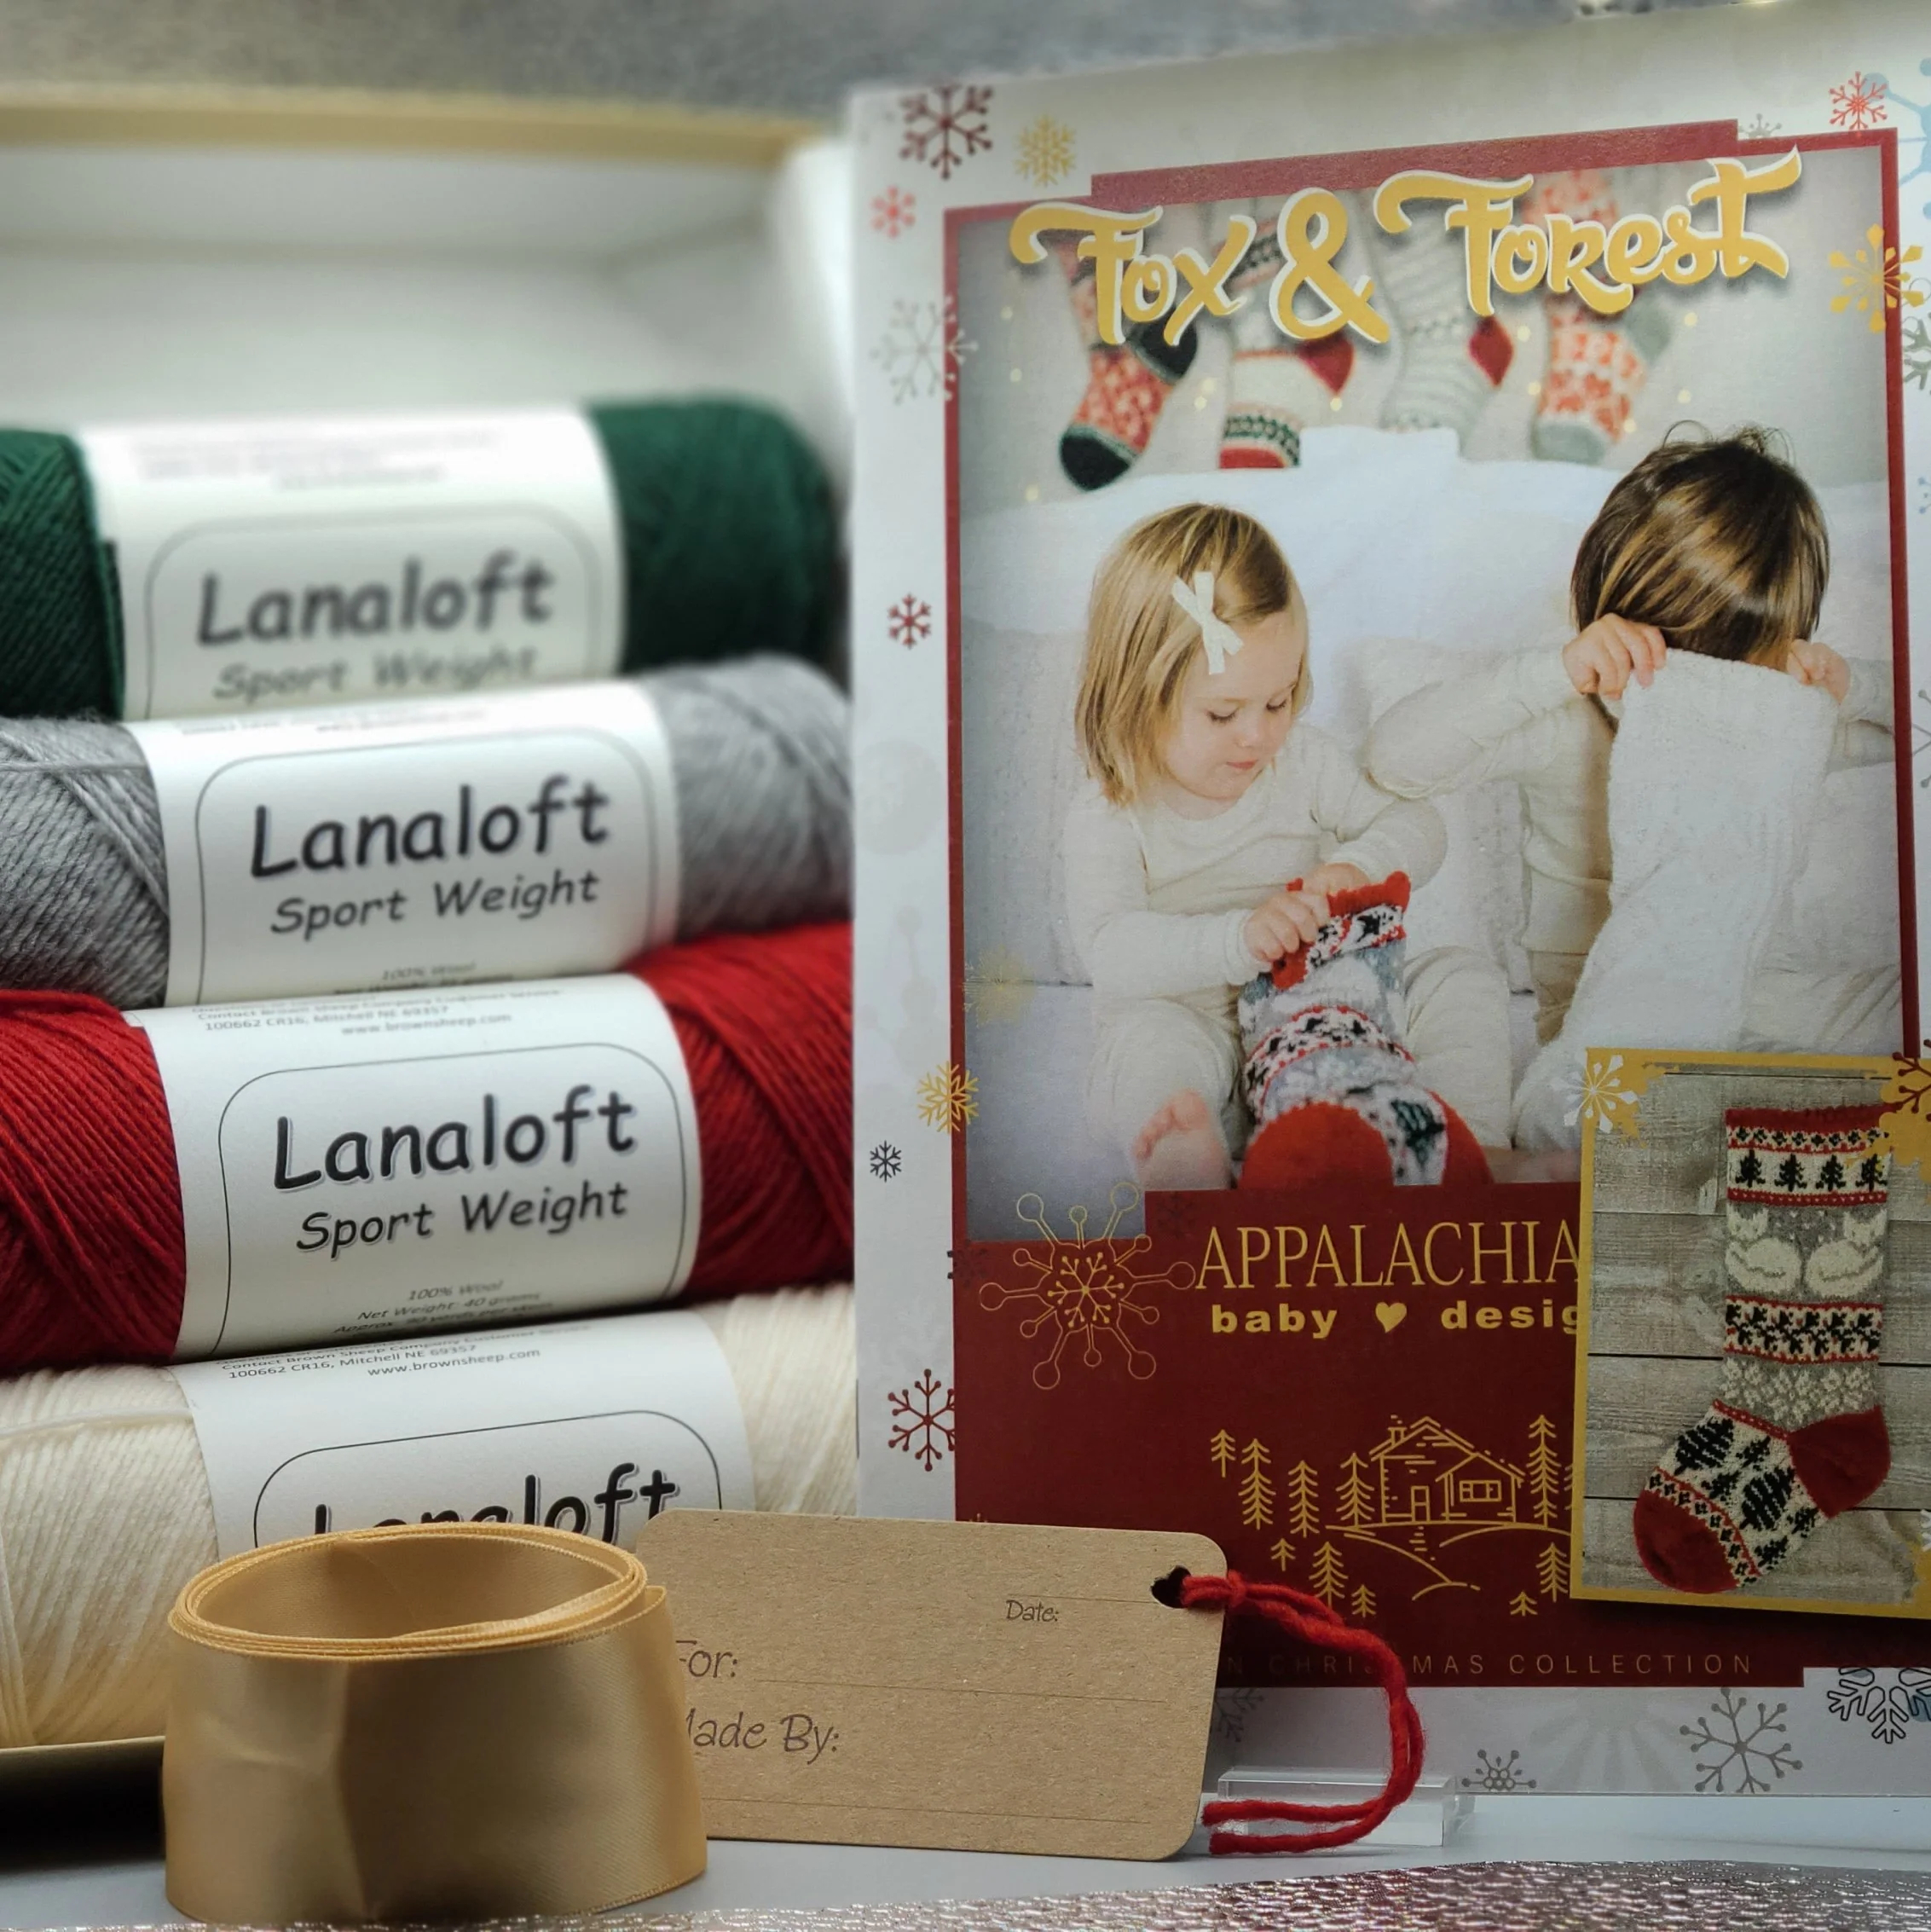 4 skeins of Lanaloft in holiday hues paired with a gift tag and Christmas stocking knitting kit